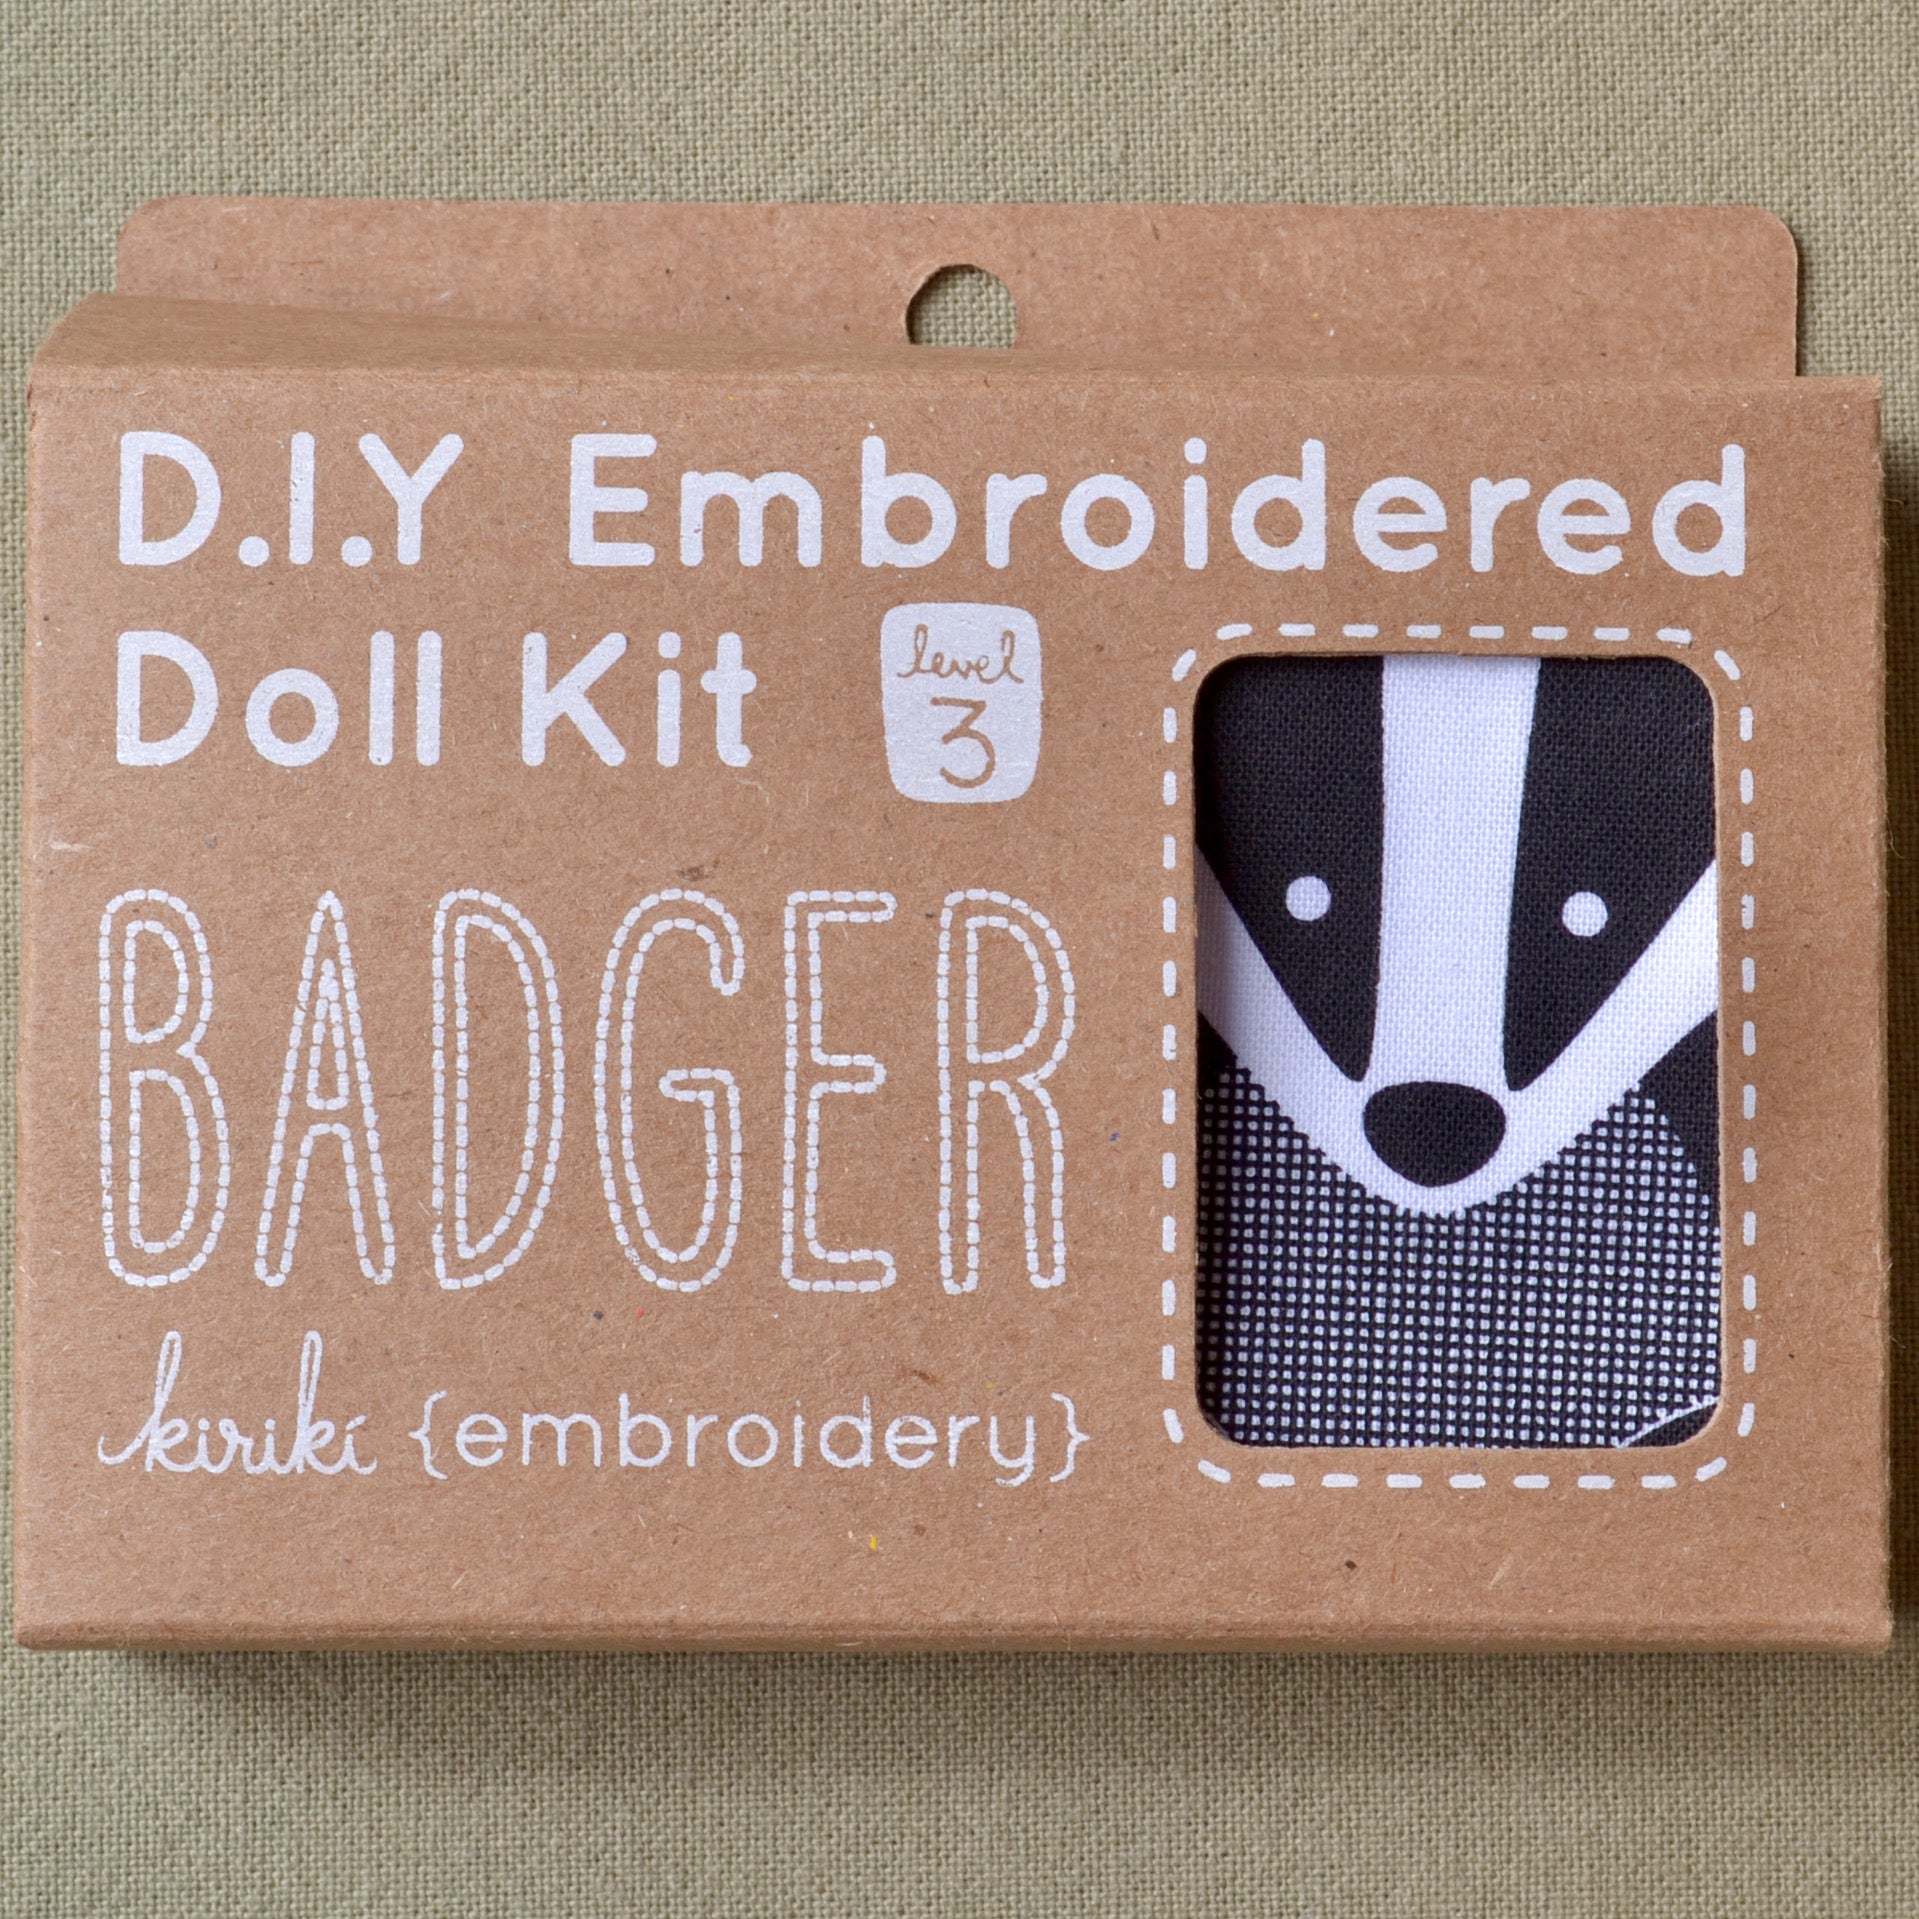 Embroidery Kit, Badger